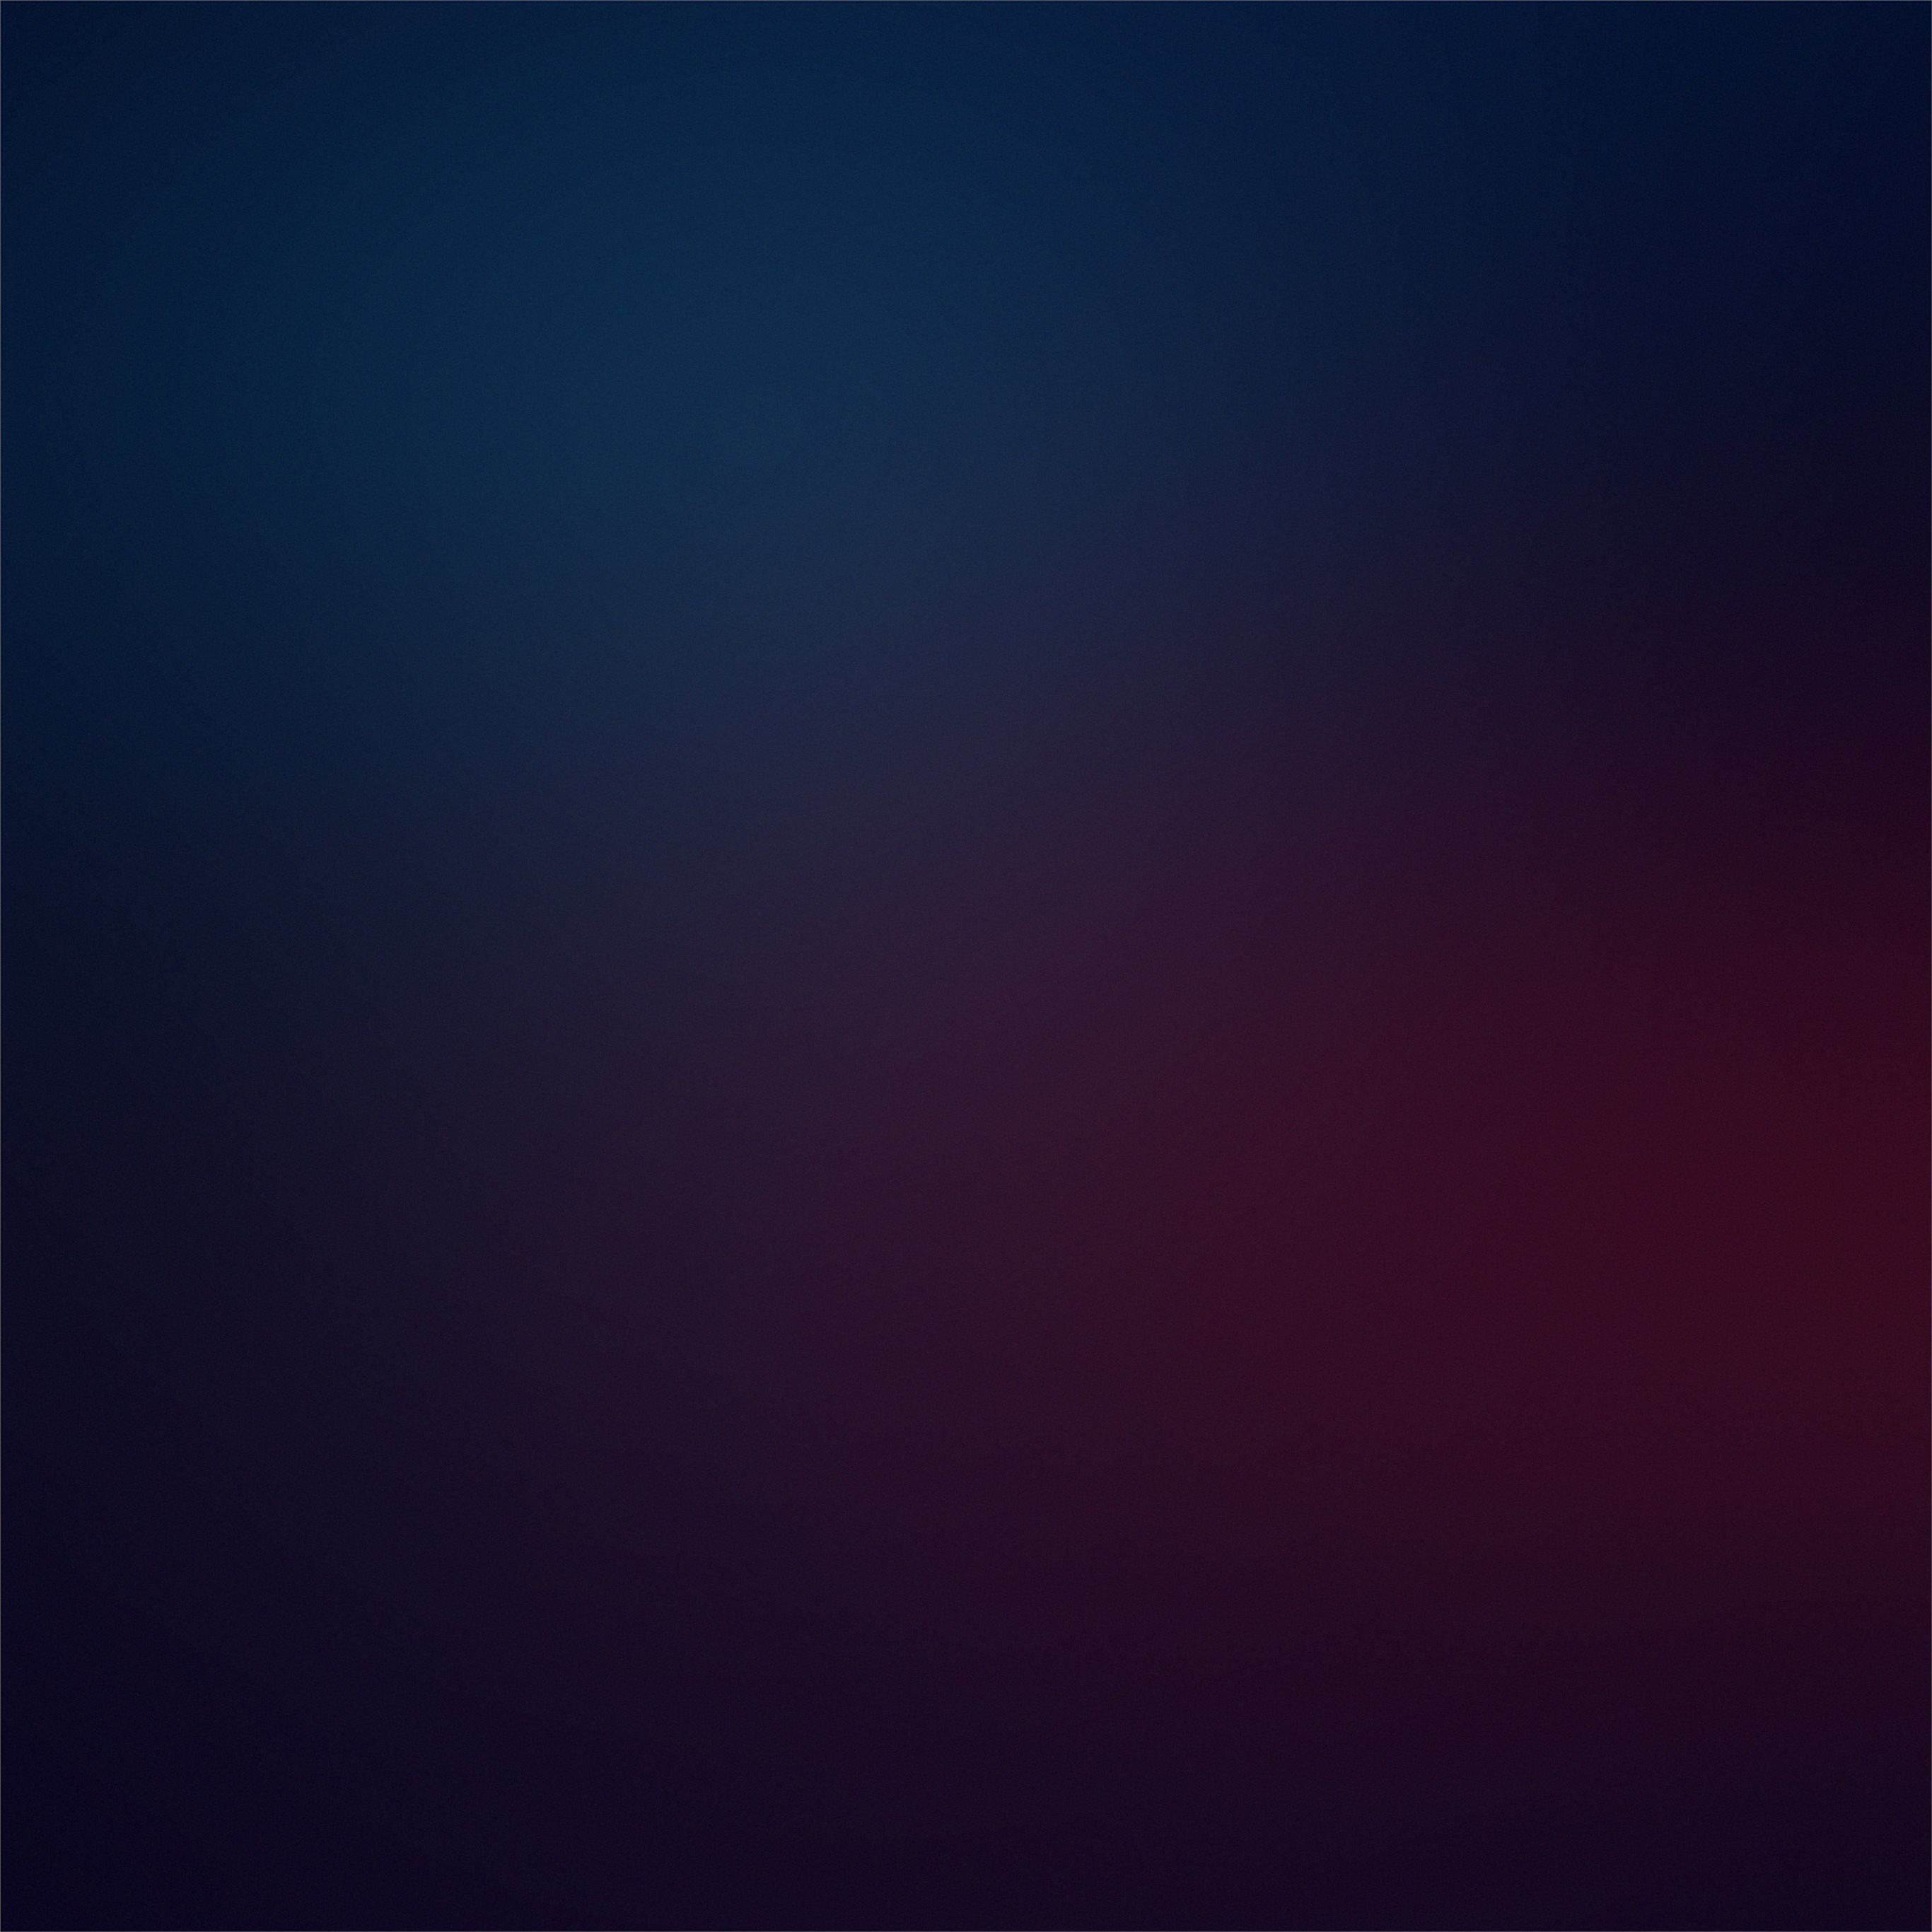 A dark blue and red gradient background - Blurry